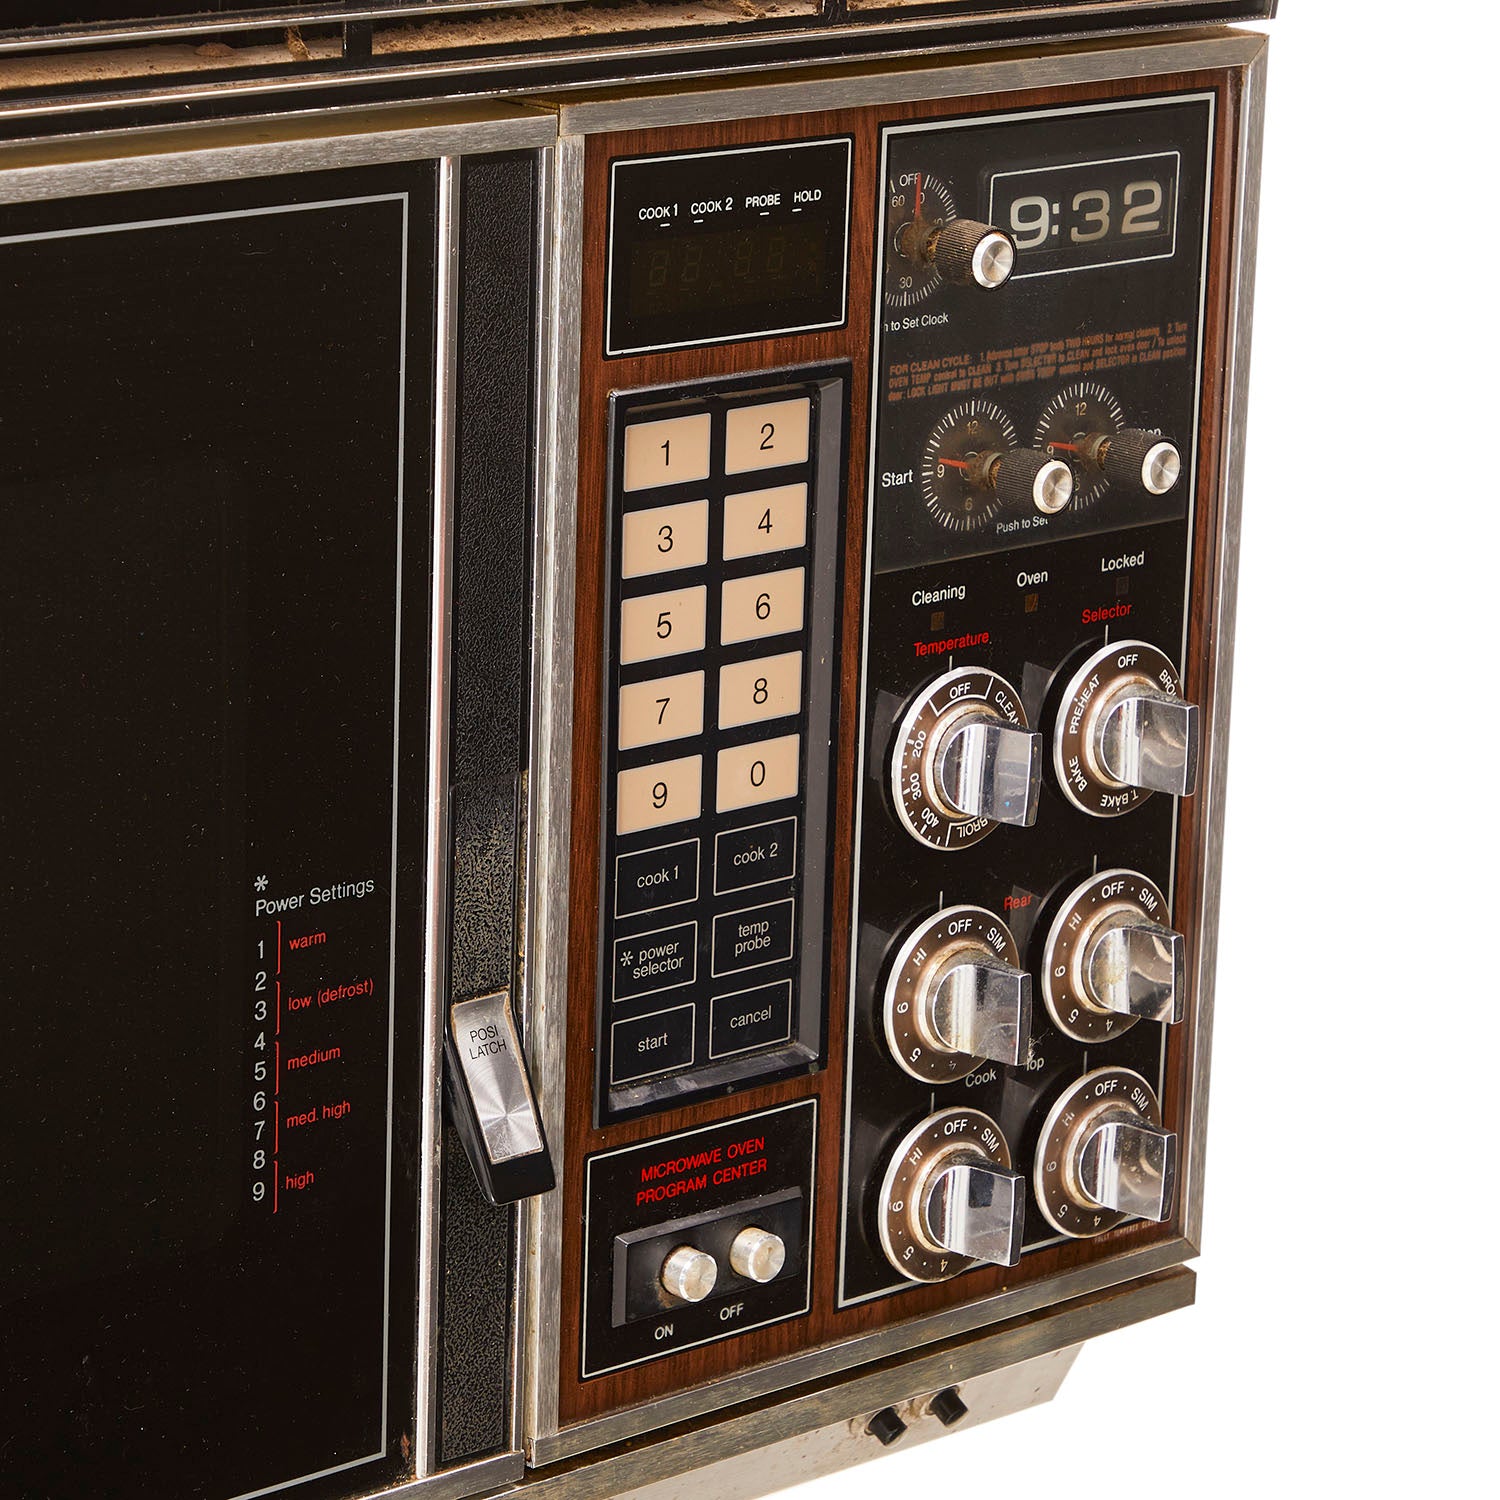 And the oldest microwave is …